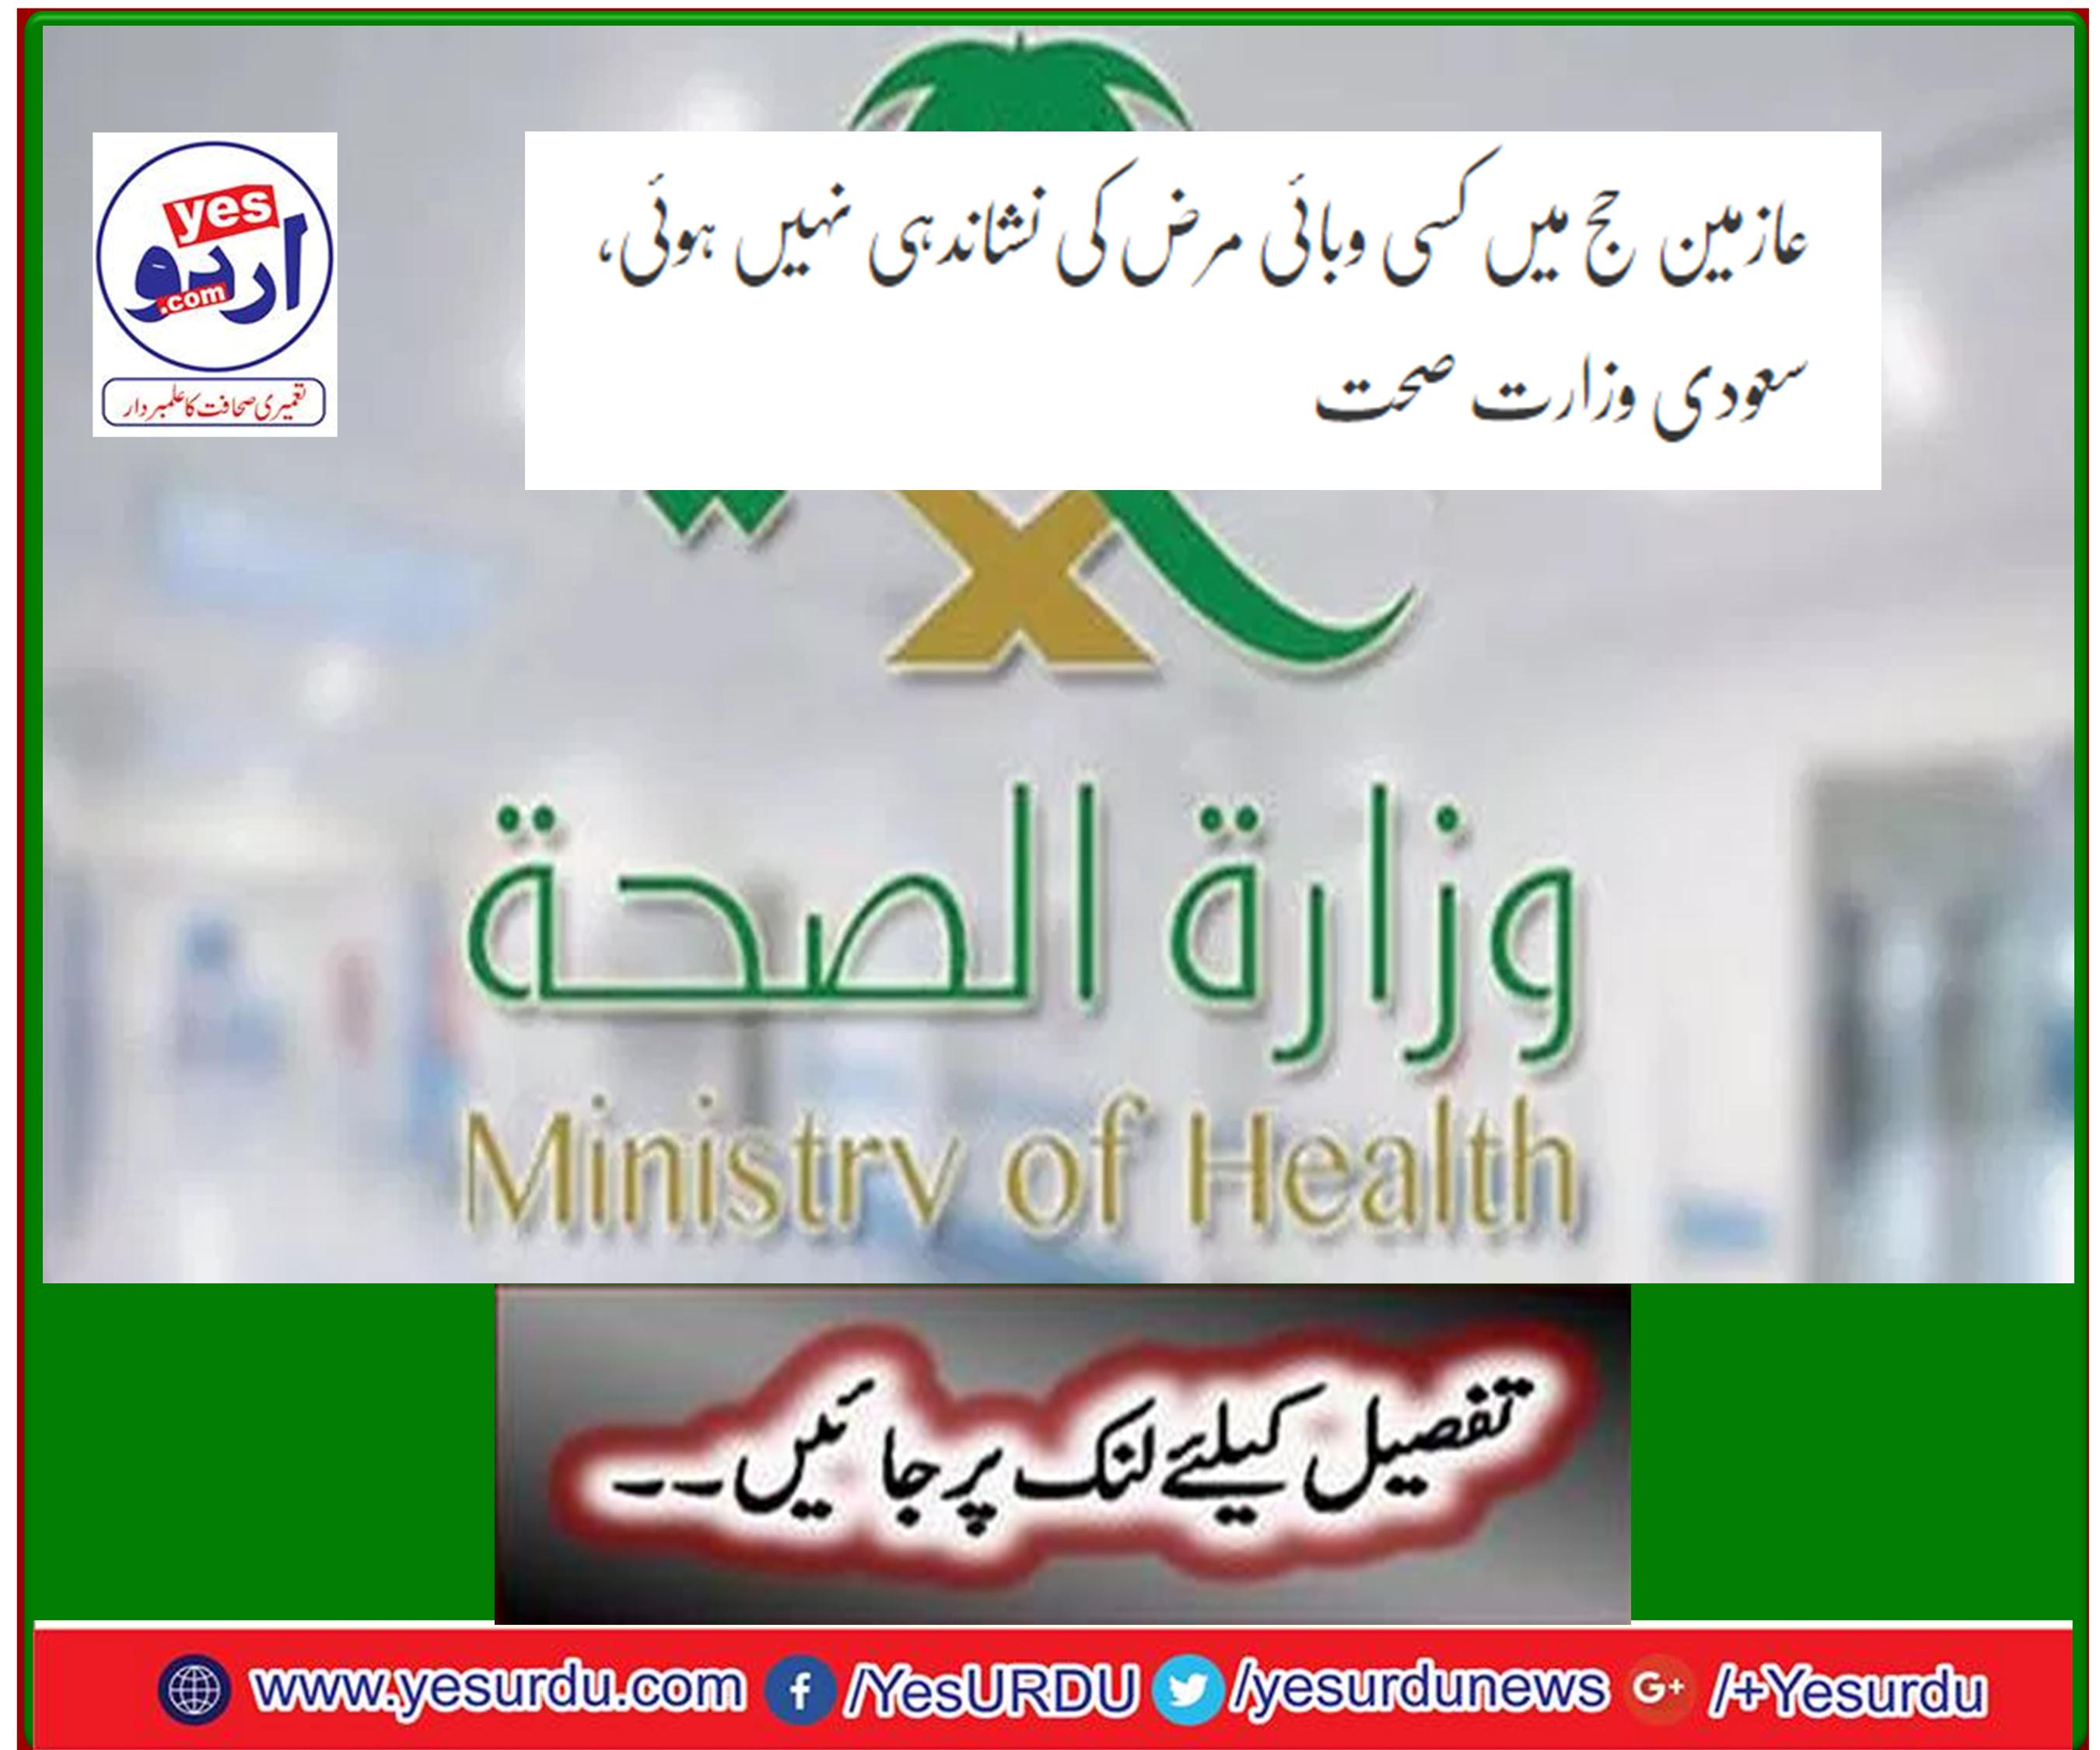 No pandemic has been identified in pilgrims: Saudi Ministry of Health